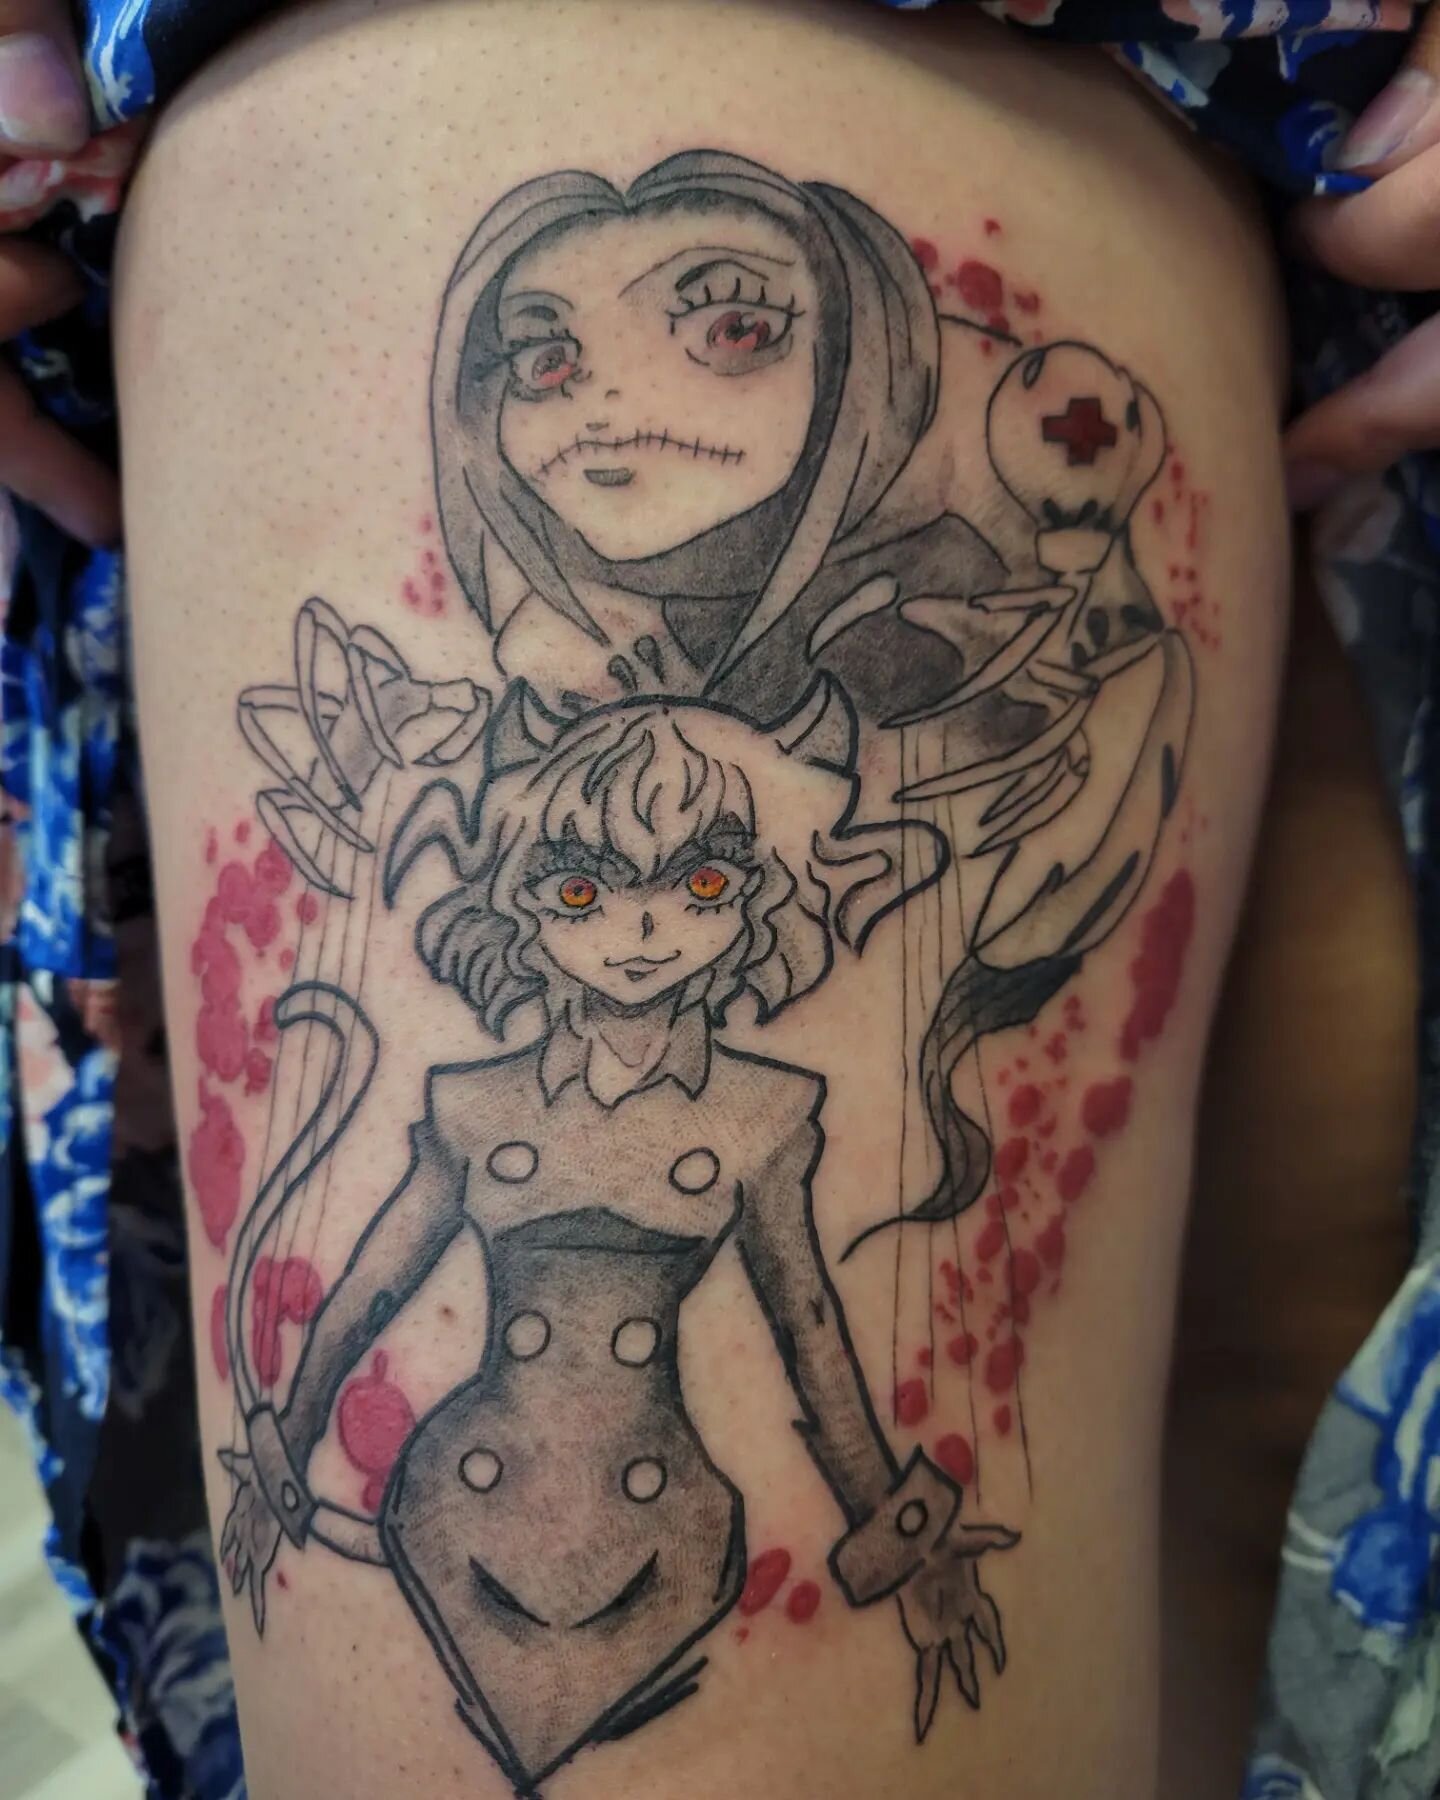 😸🏥 Neferpitou &amp; Dr Blythe 🏥😸

Some super dope villian characters from Hunter x Hunter for the always lovely @demonica.920 . The thigh is no joke, but we agreed the blood splatter was worth it. 
.
.
.
.
.
#drblythenstein #hxh #hunterxhunter #n